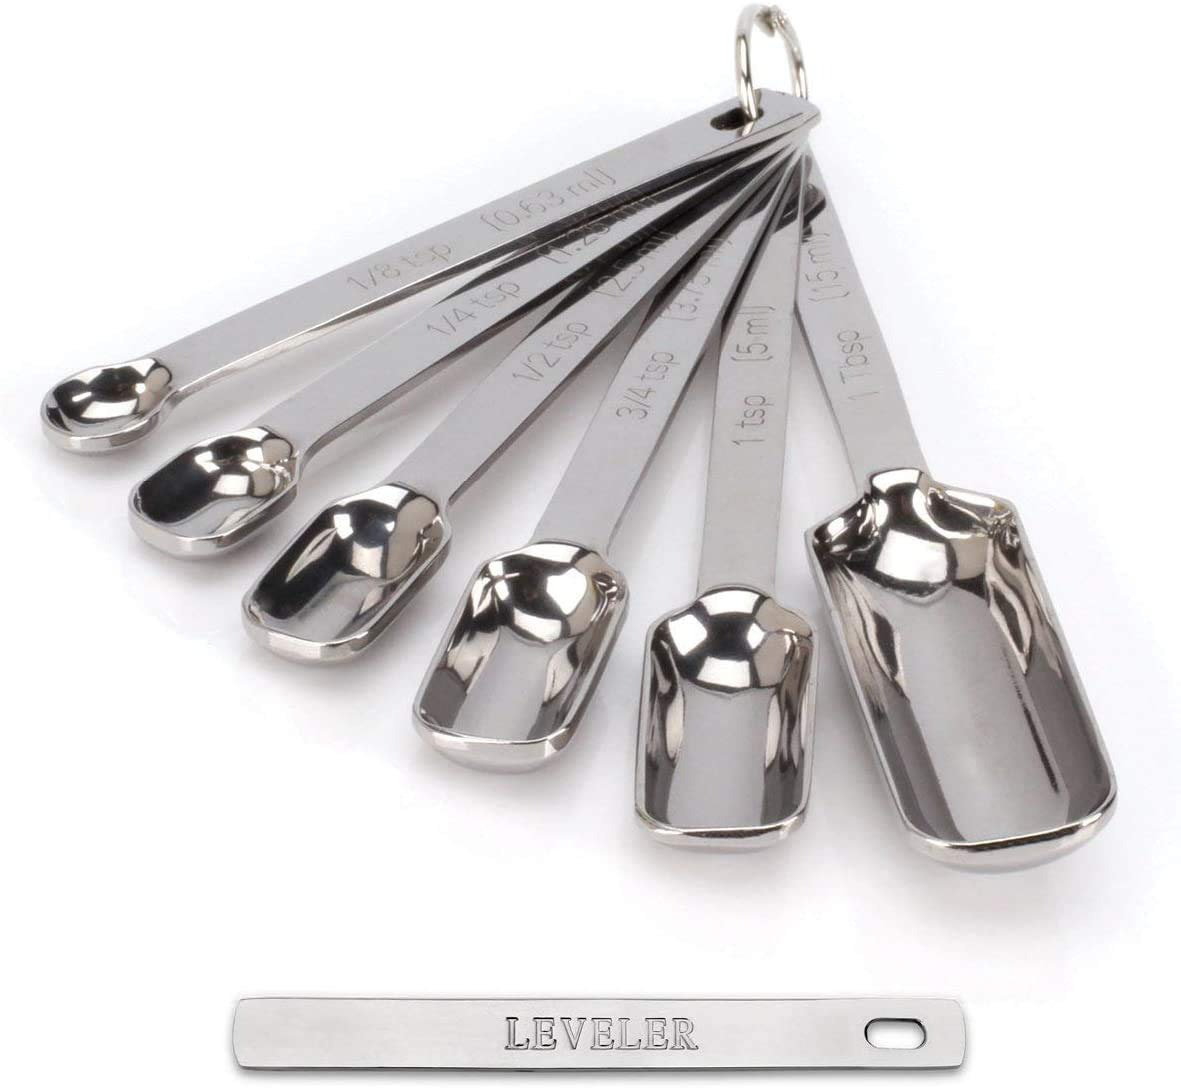 9-piece Set Of Kitchen And Baking Measuring Cups And Spoons, Stainless  Steel Copper Chrome, With Engraved Measurements